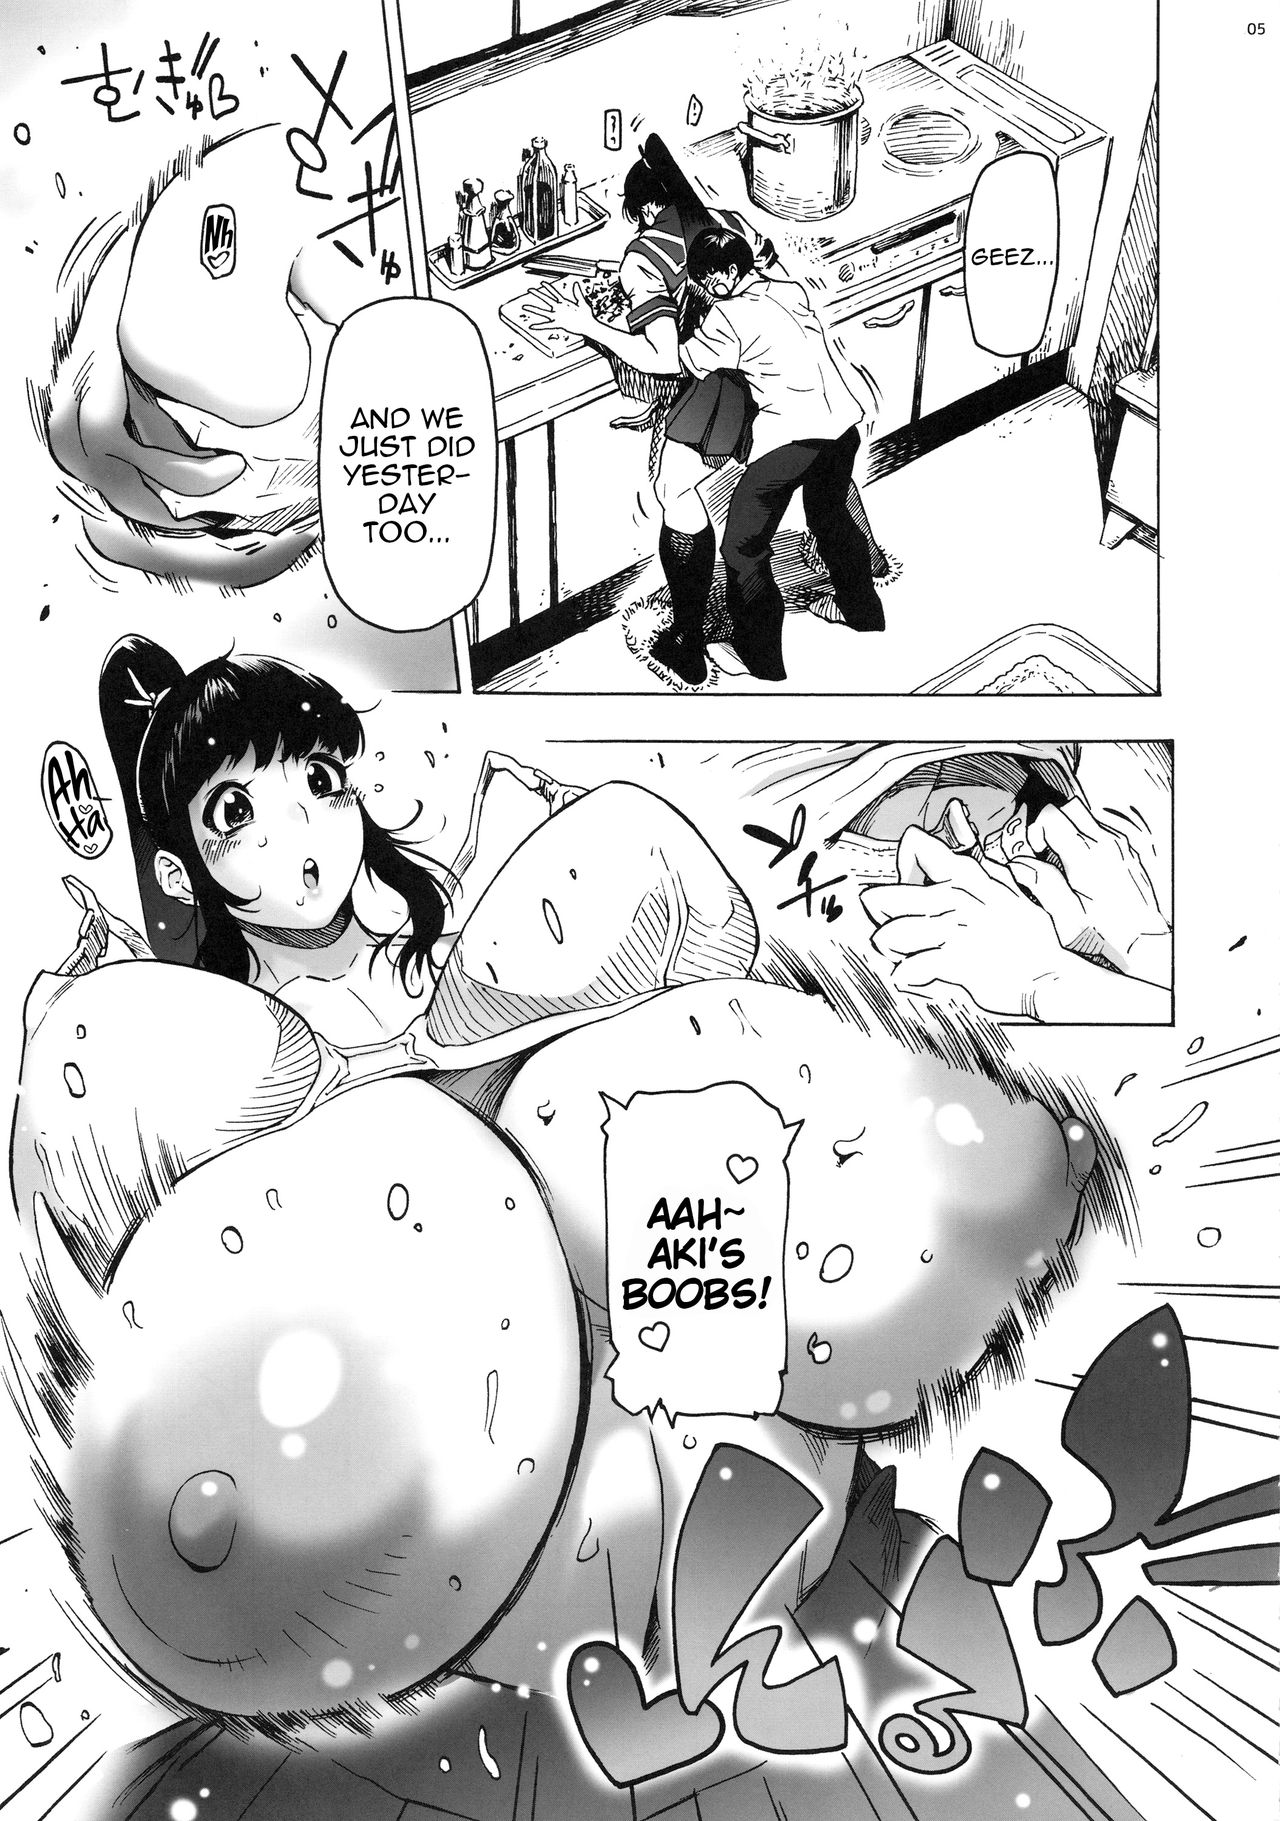 [Coochy-Coo (Bonten)] My Childhood friend is a JK Ponytailed Girl | With Aki-Nee 2 | AkiAss 3 | Trilogy [English] {Stopittarpit} page 6 full